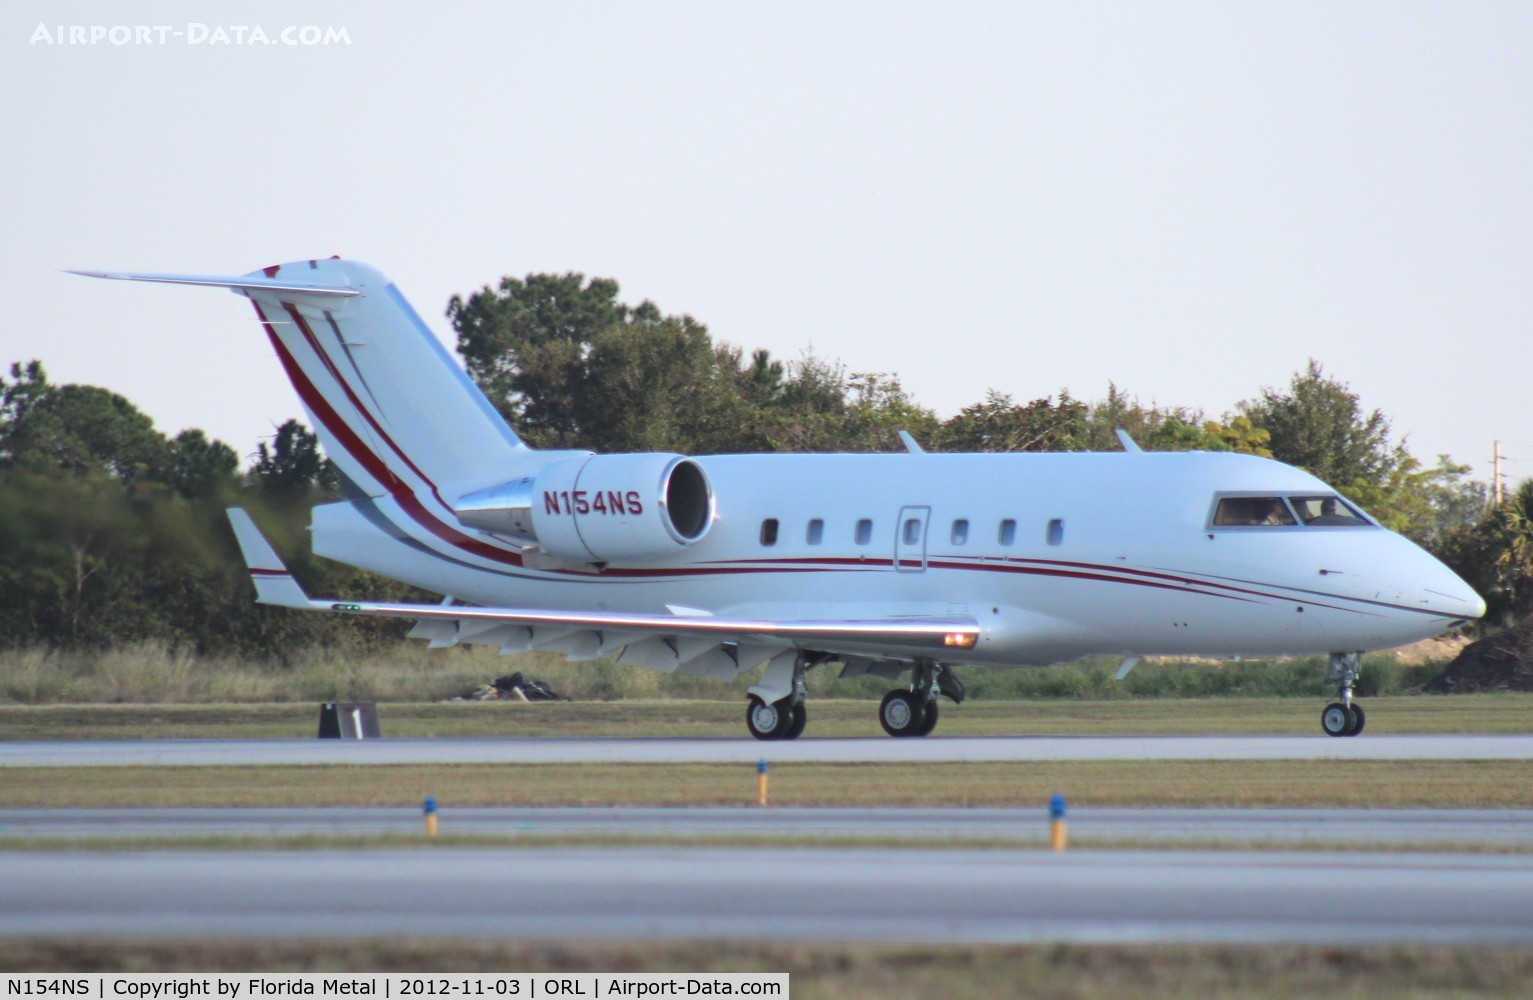 N154NS, 1994 Canadair Challenger 601-3R (CL-600-2B16) C/N 5169, Norfolk and Southern Railway CL600